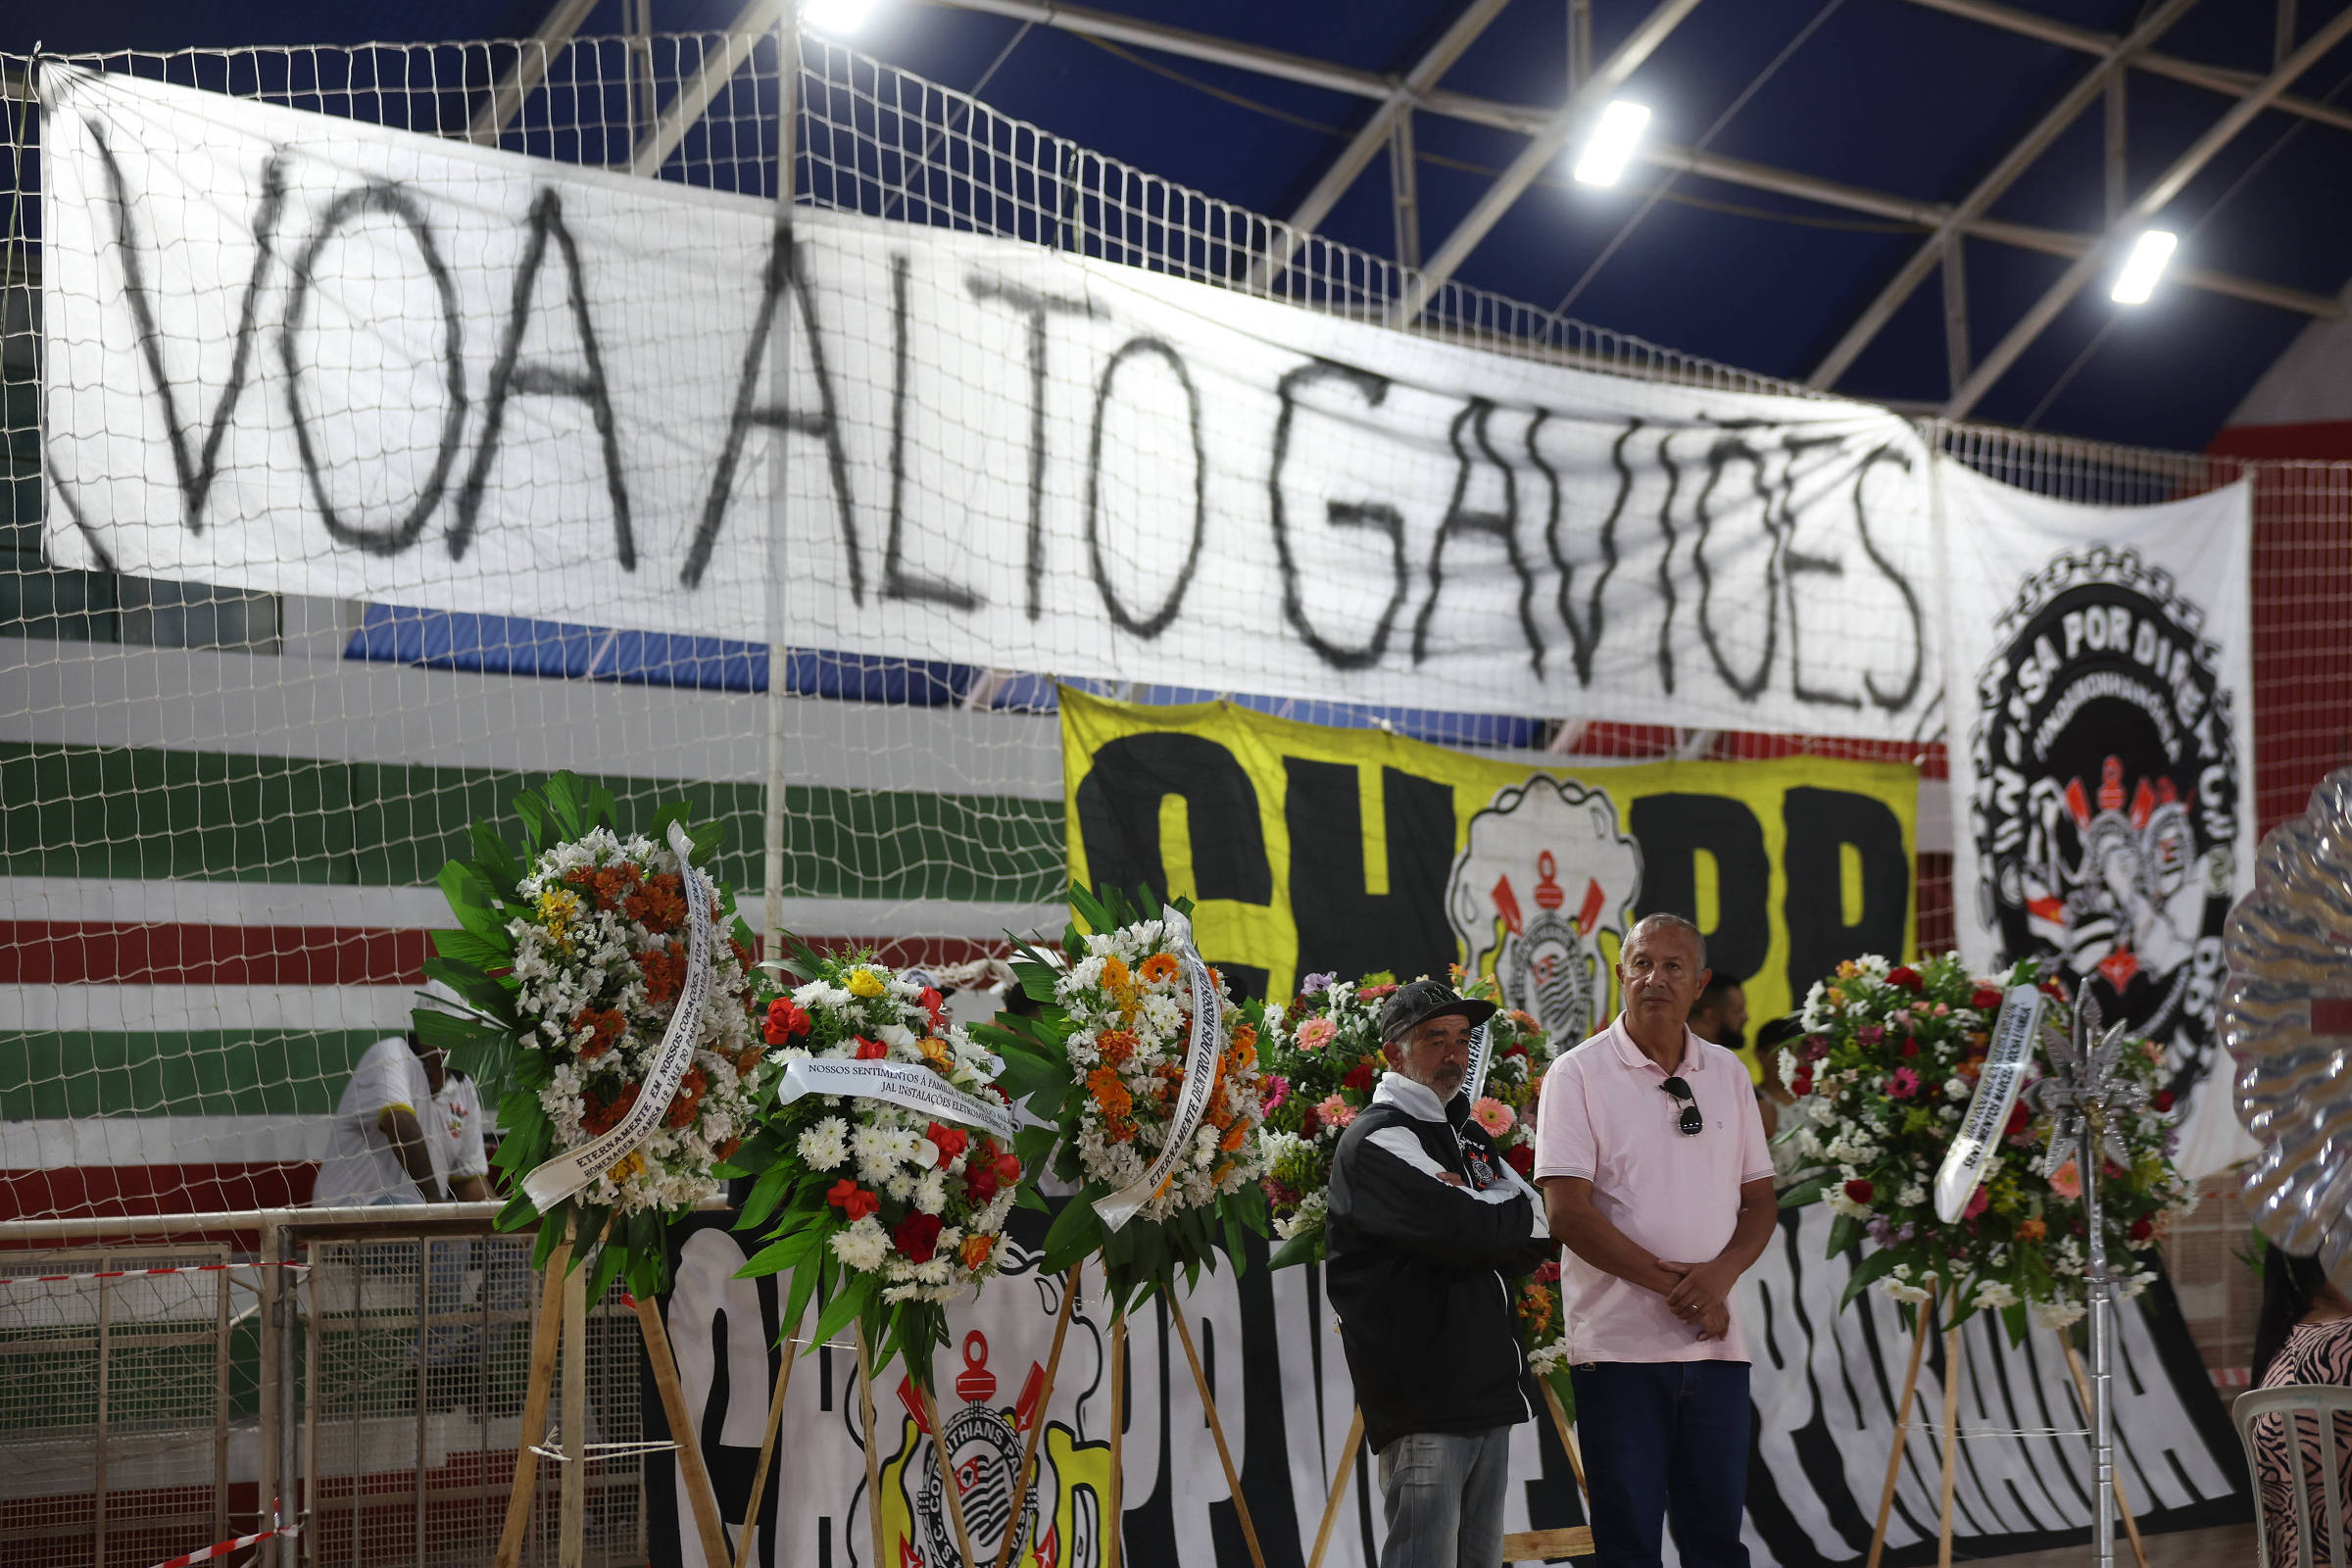 Homage to dead Corinthians fans has drums, hymns and a lot of emotion in the interior of SP